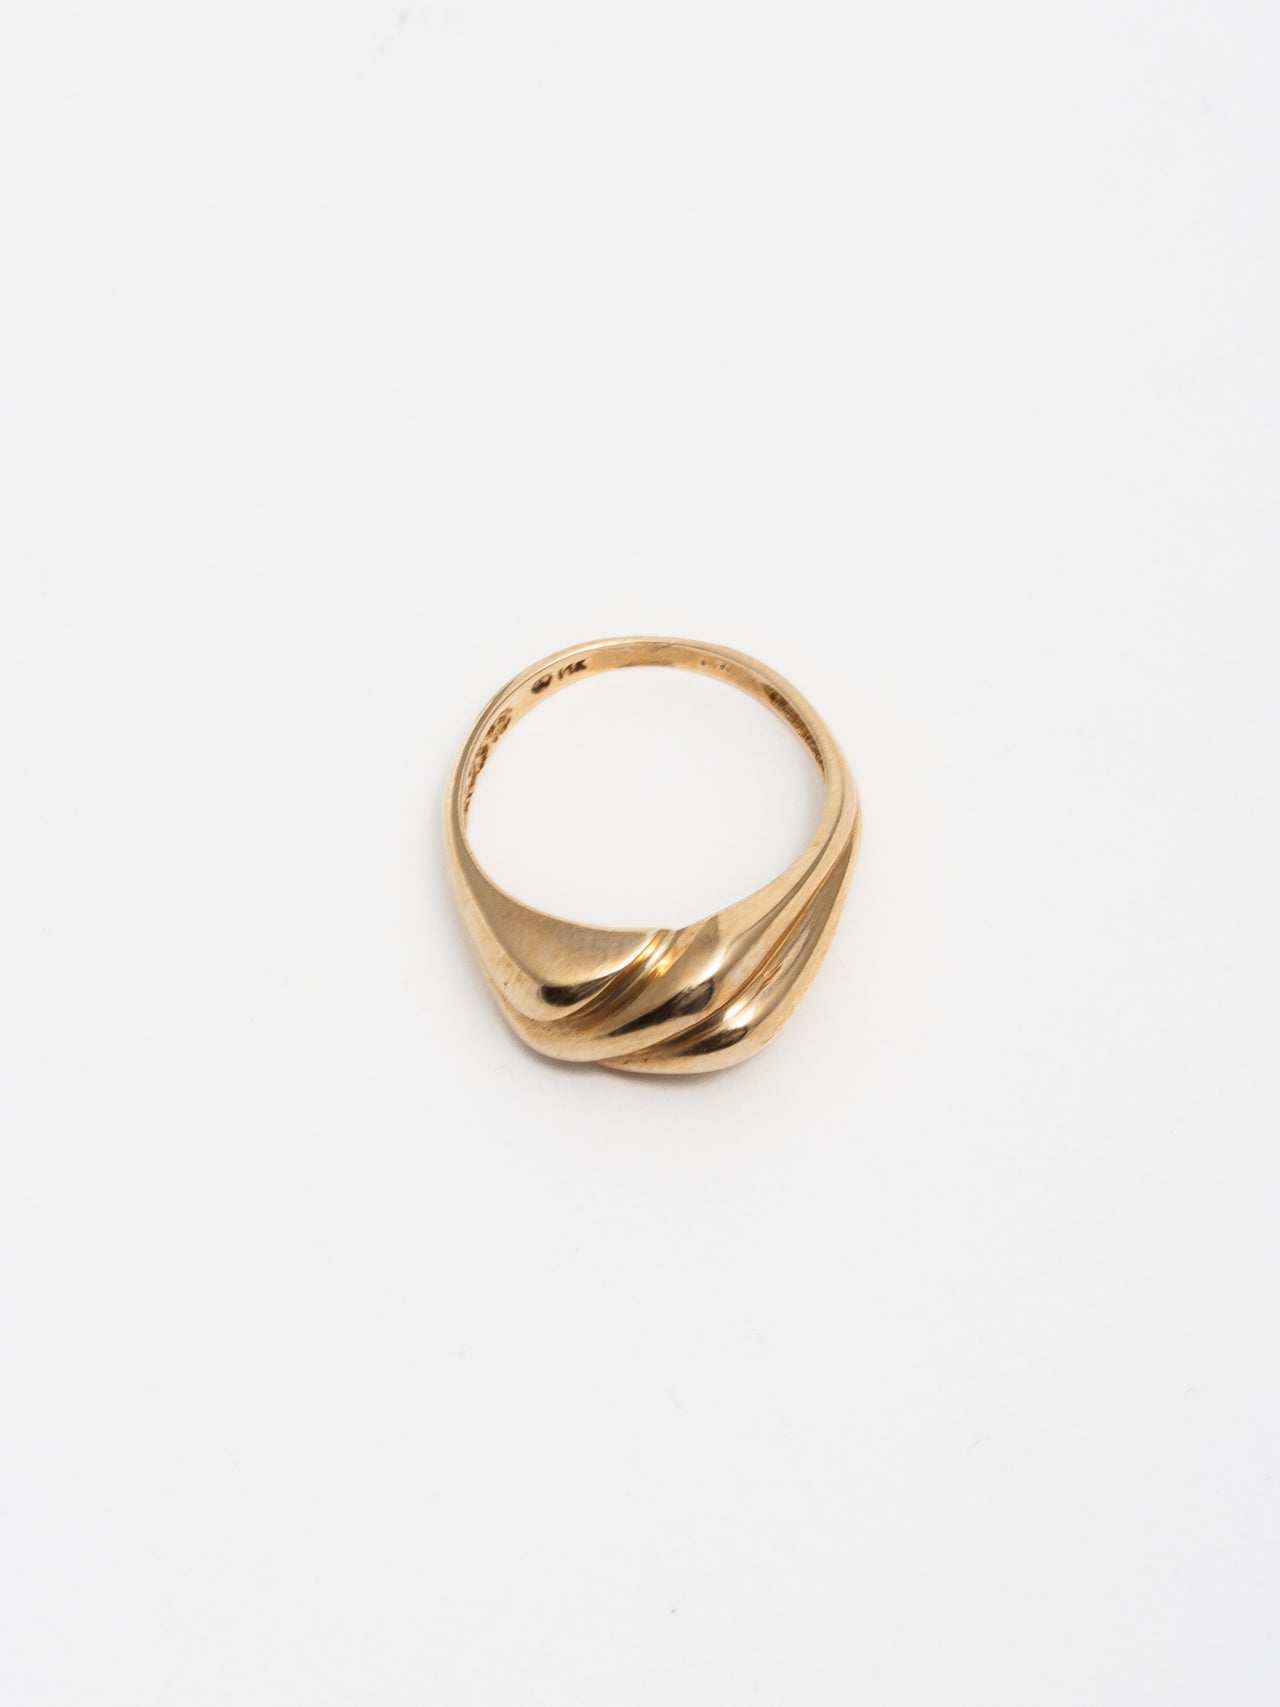 Overview of 14Kt Yellow Gold Layered Dome Ring. Light grey background. 